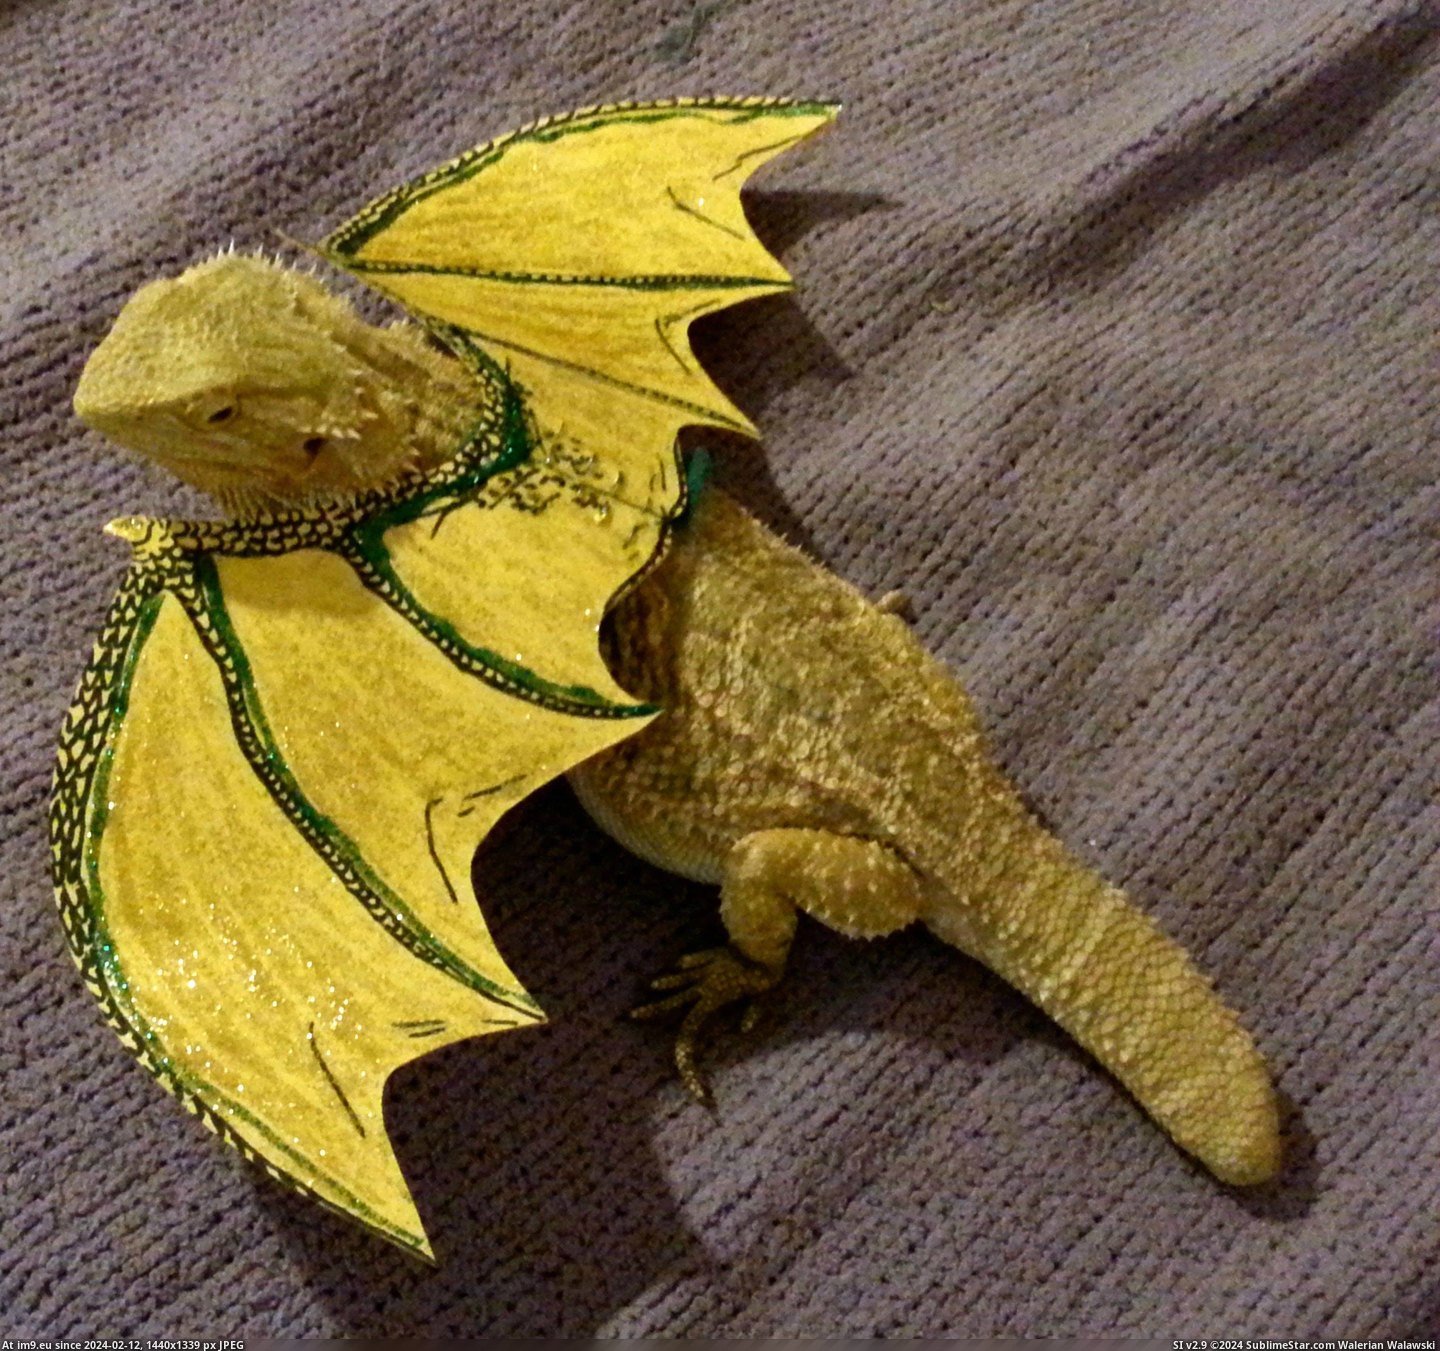 #For #Girlfriend #Dress #Bearded #Insisted #Halloween #Our #Dragon [Pics] My girlfriend insisted we dress our bearded dragon up for Halloween Pic. (Image of album My r/PICS favs))